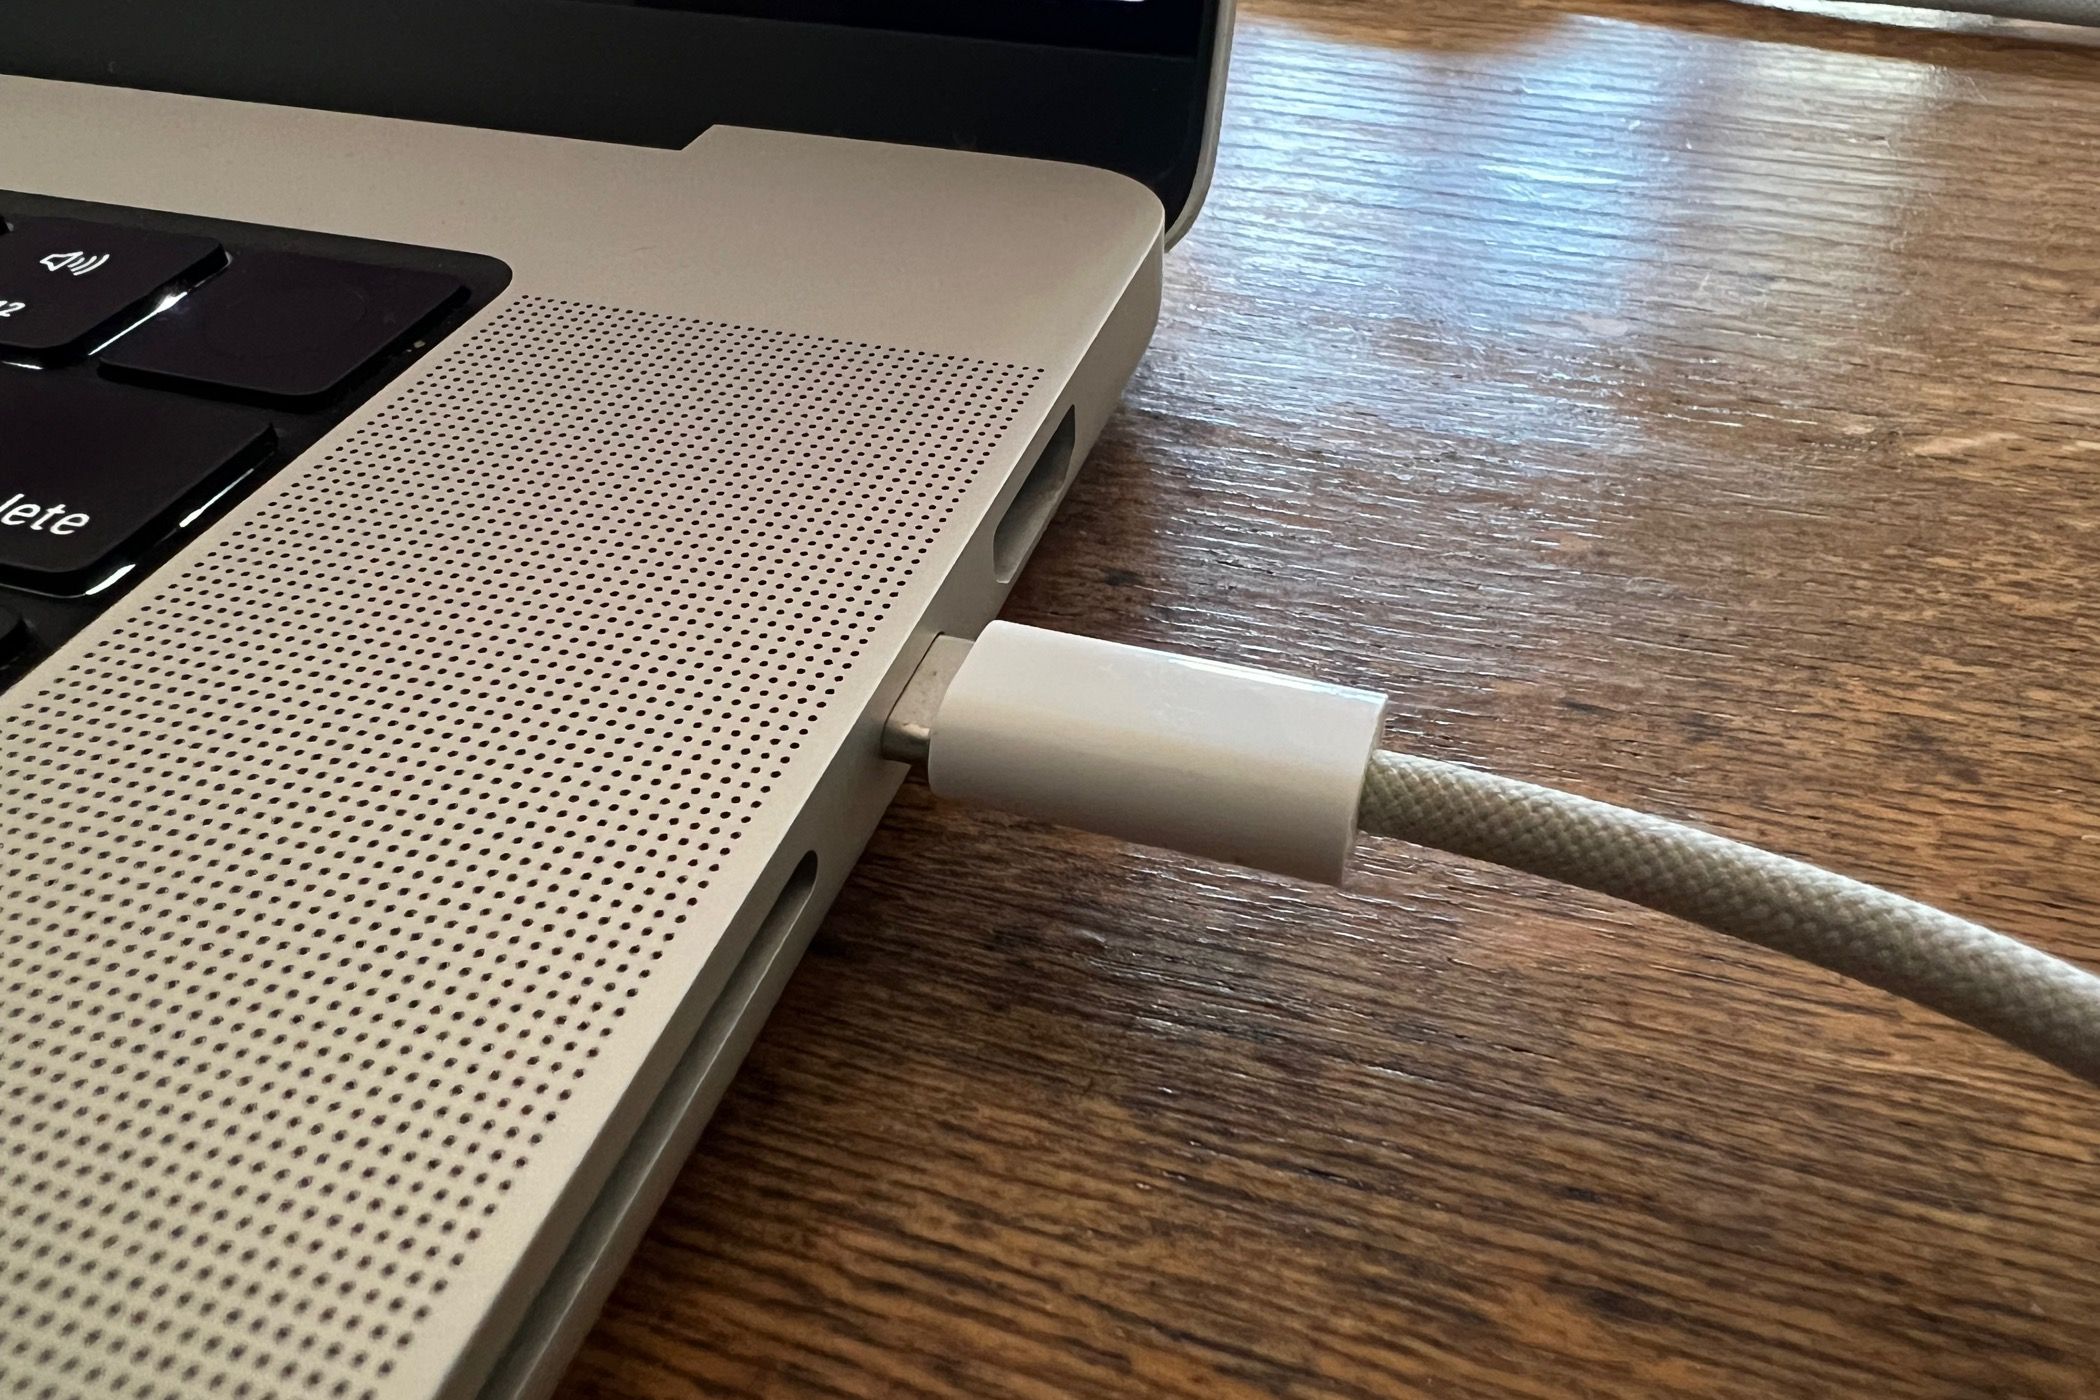 A USB-C cable thats not seated correctly